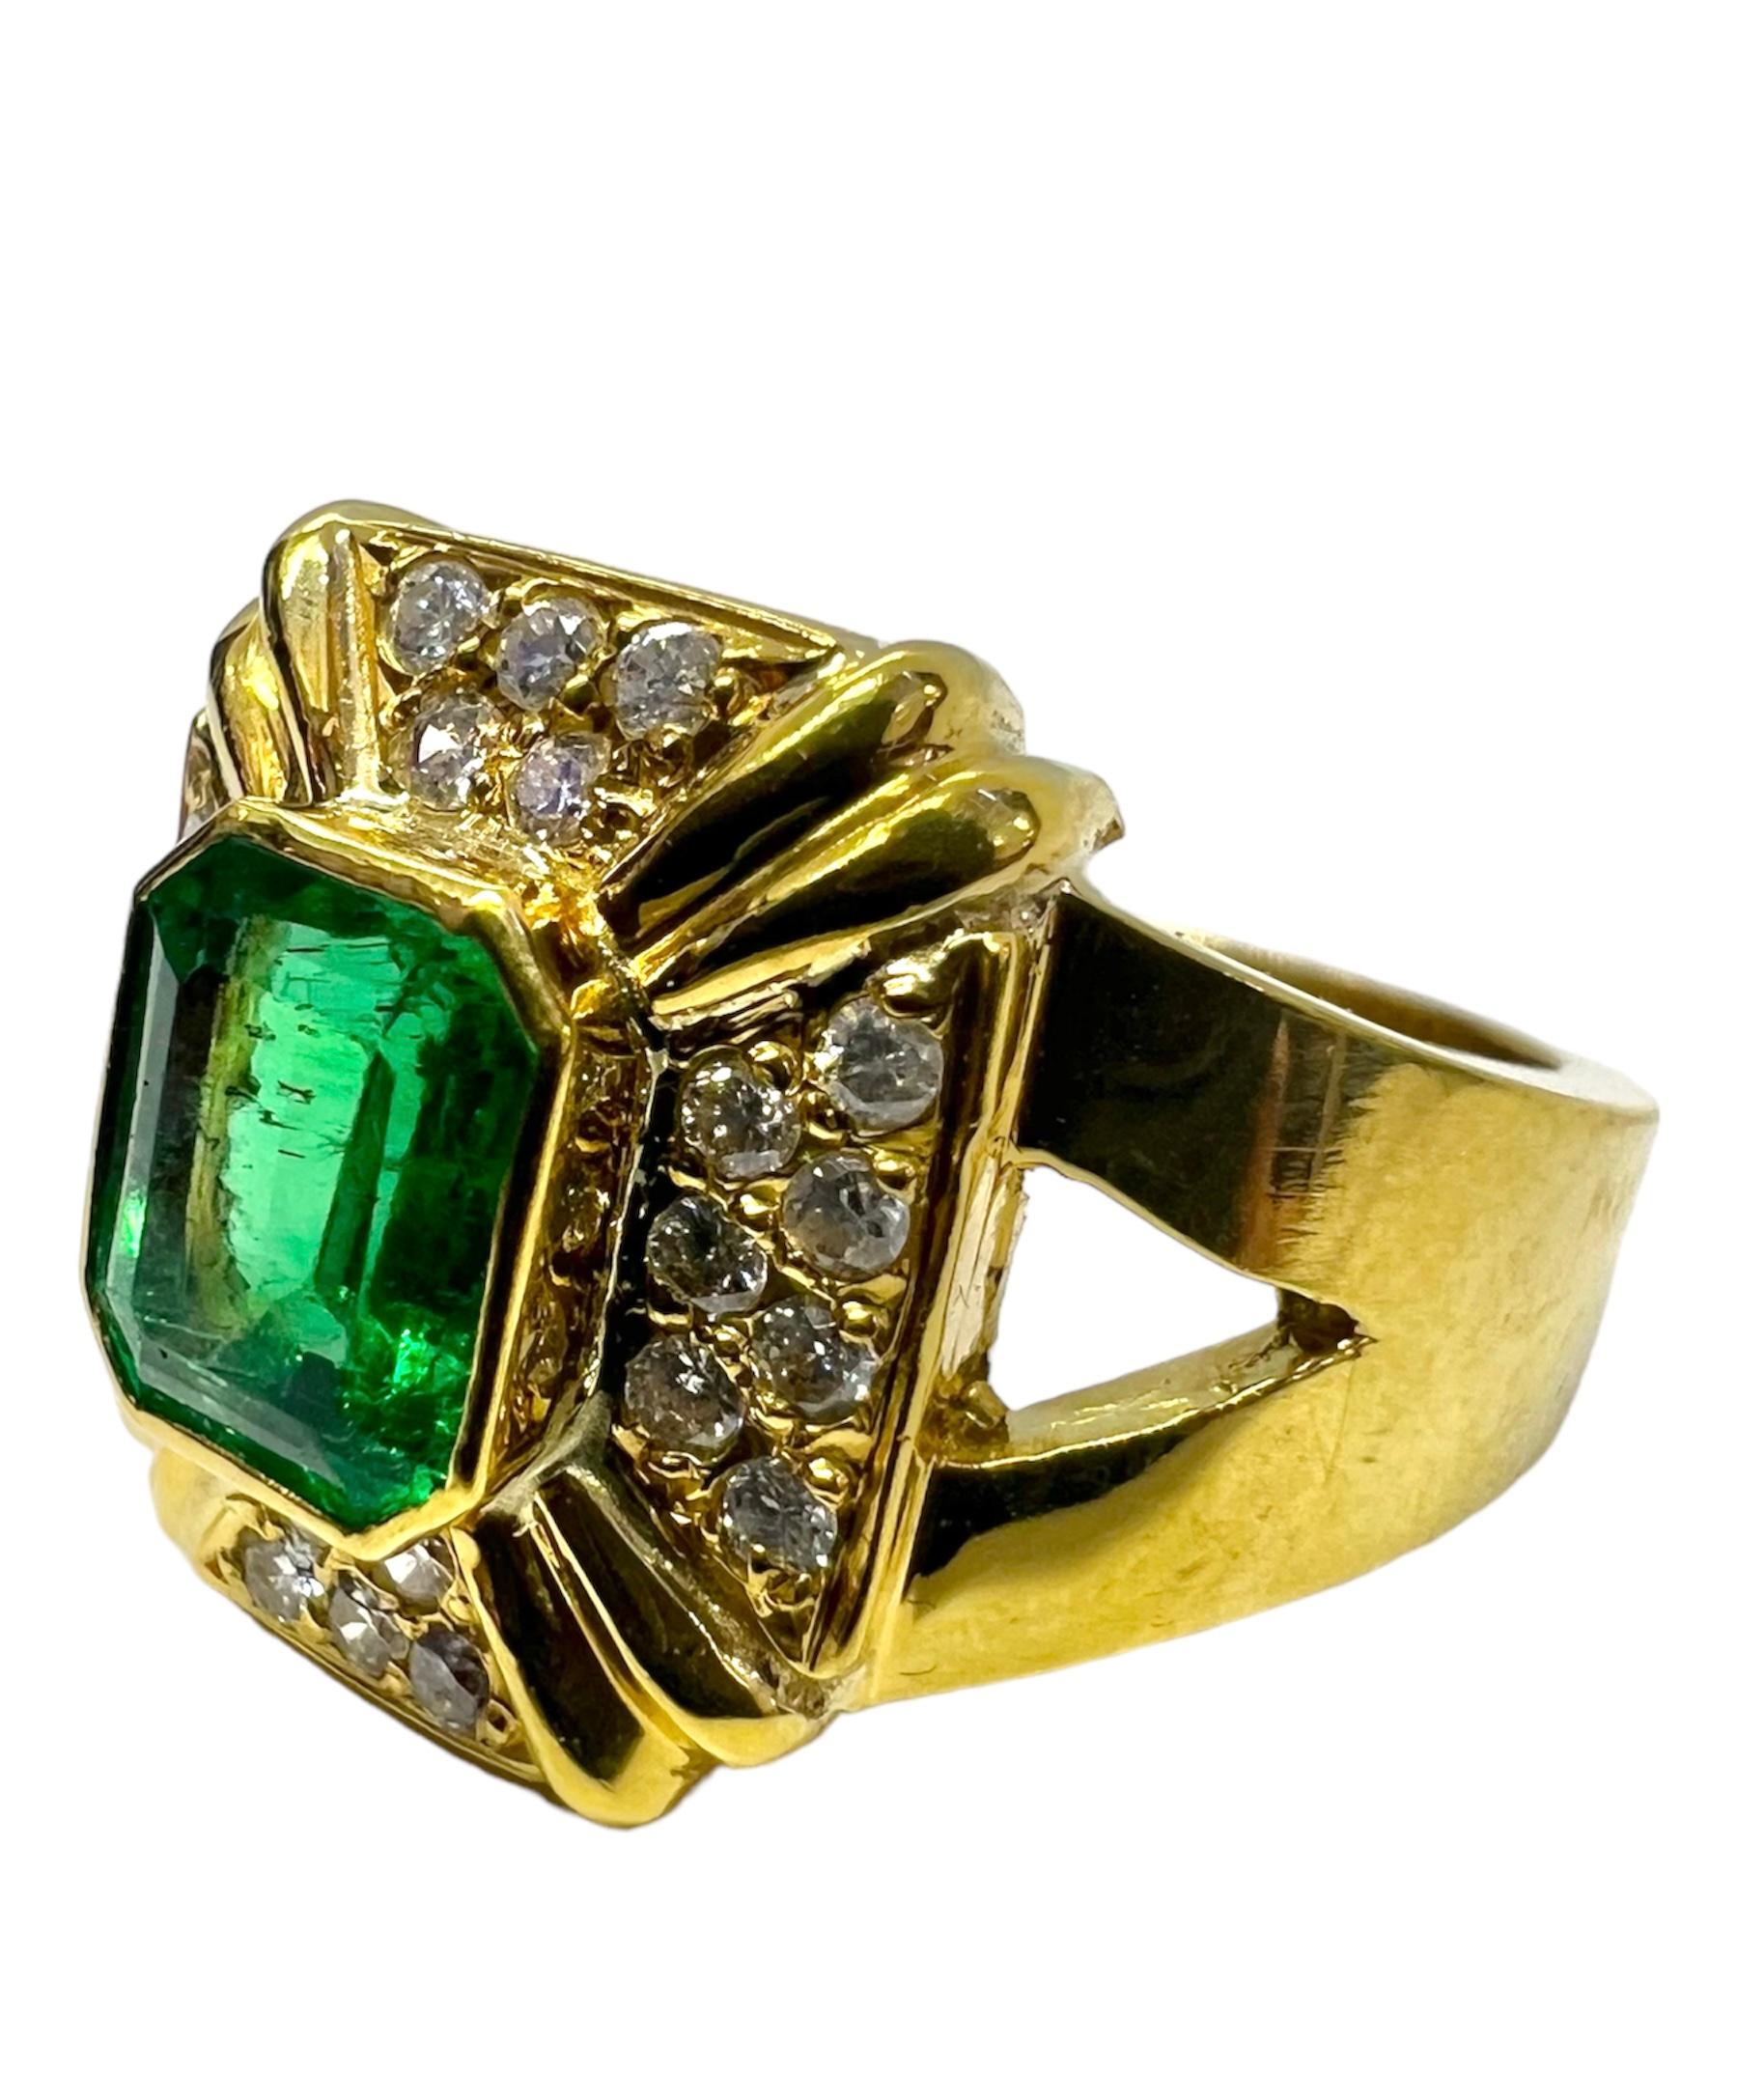 18K yellow gold ring with emerald center stone and diamond.

Sophia D by Joseph Dardashti LTD has been known worldwide for 35 years and are inspired by classic Art Deco design that merges with modern manufacturing techniques.